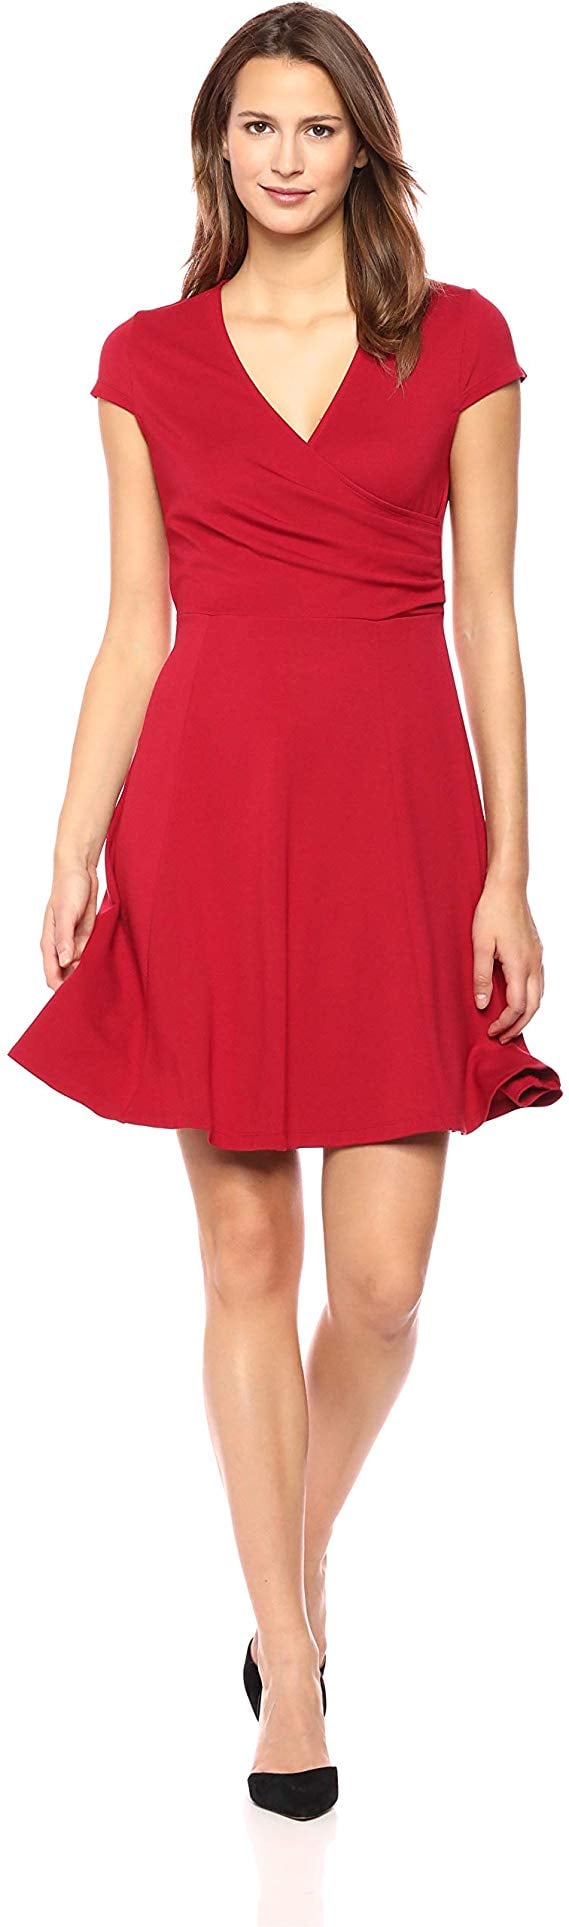 Brand Lark & Ro Womens Cap Sleeve Faux Wrap Fit and Flare Dress 